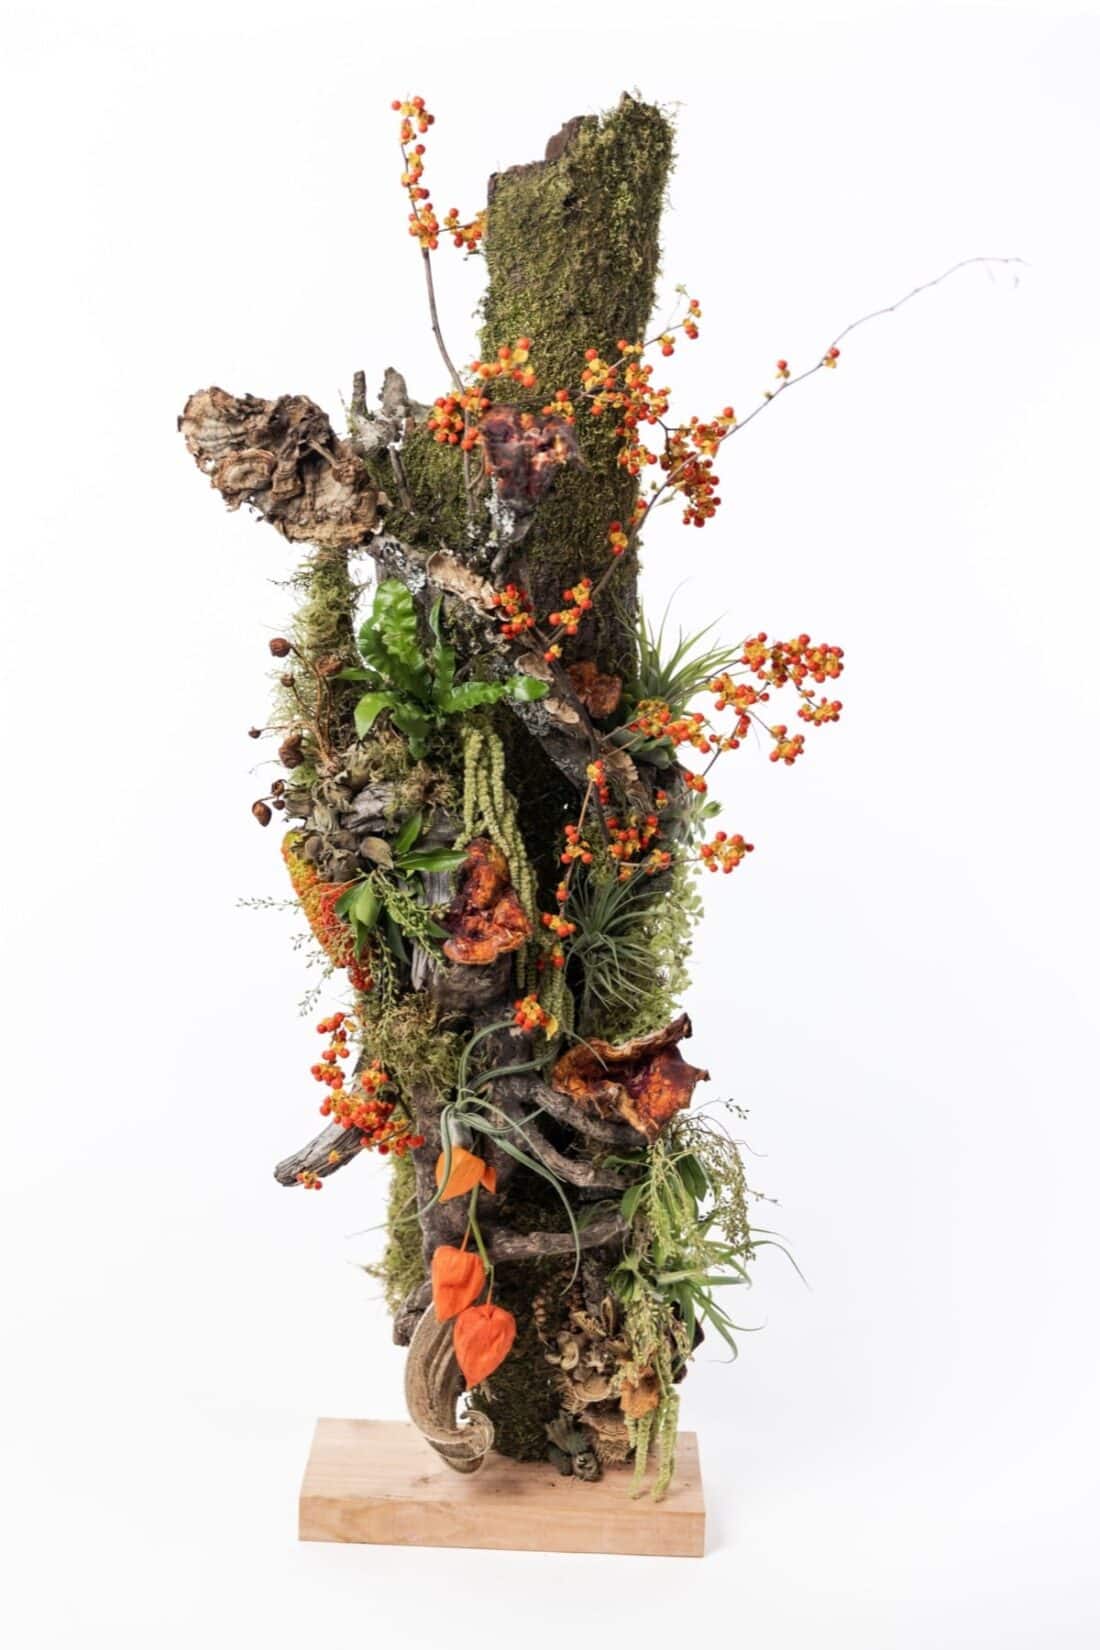 A vertical composition of assorted natural elements from a woodland garden, including moss, wood, and orange berries, arranged on a wooden base to form a decorative piece.